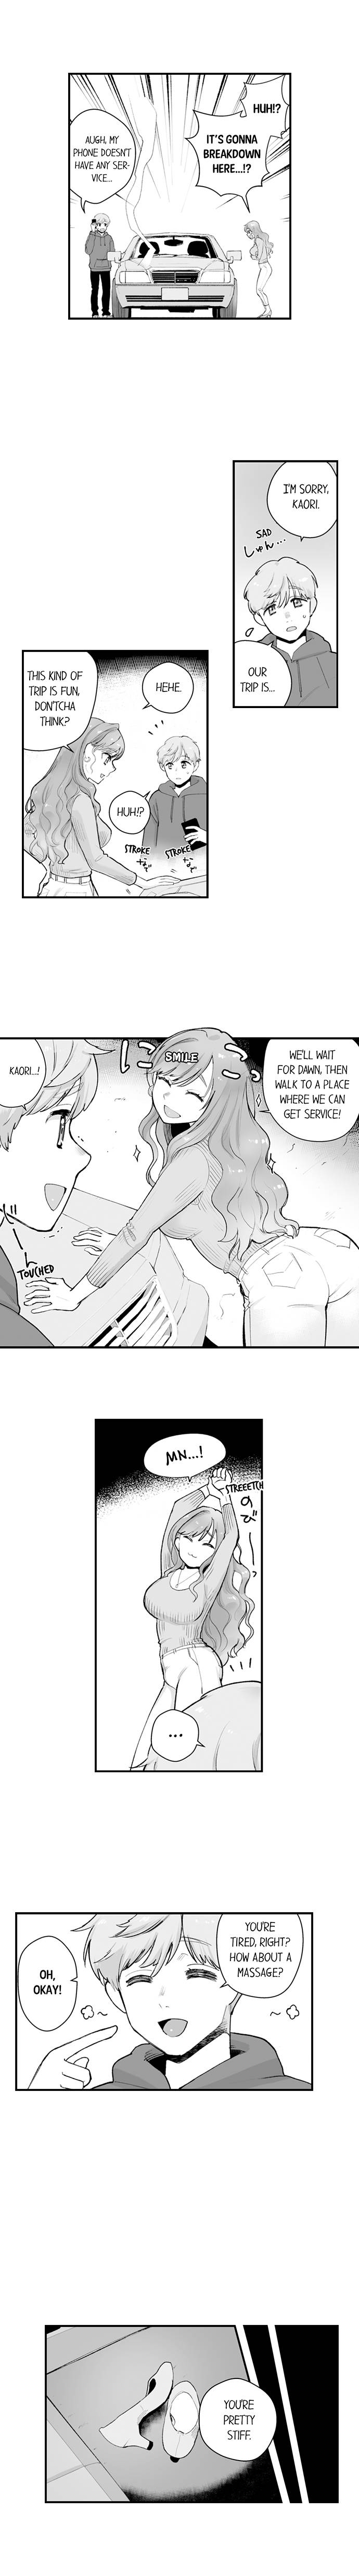 The Massage ♂♀ The Pleasure of Full Course Sex - Chapter 8 Page 3